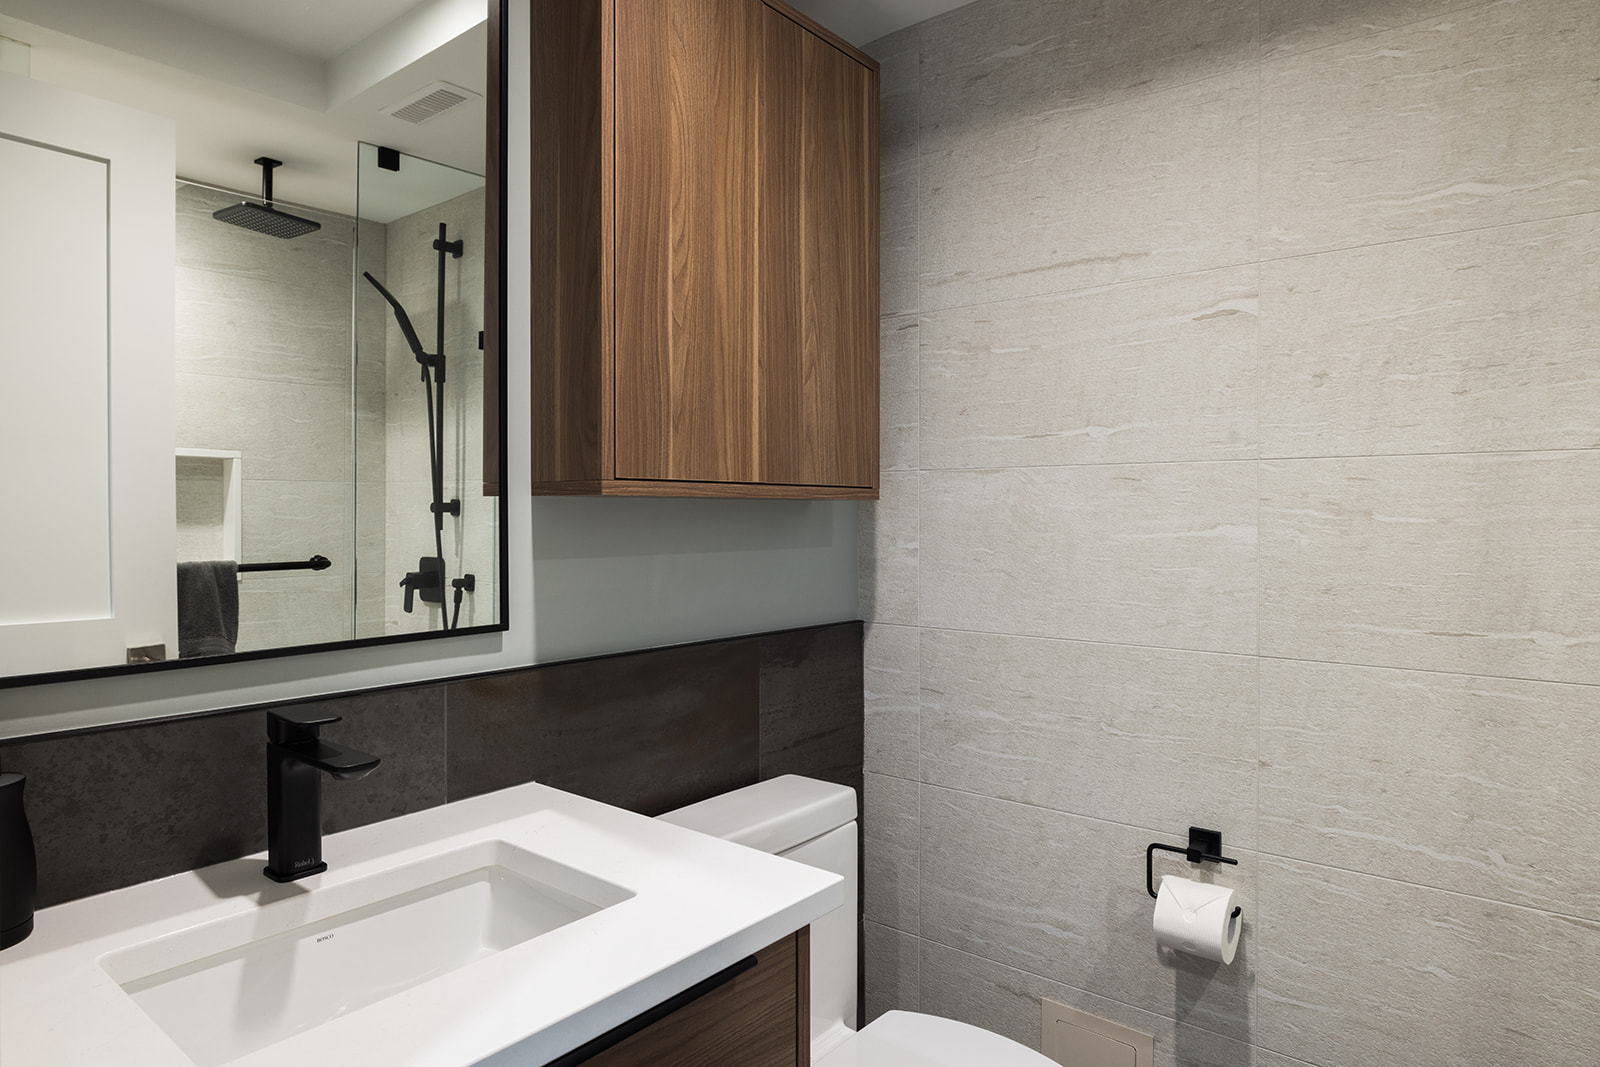 Downtown Toronto condo bathroom renovation with built-in storage above toilet and white vanity top